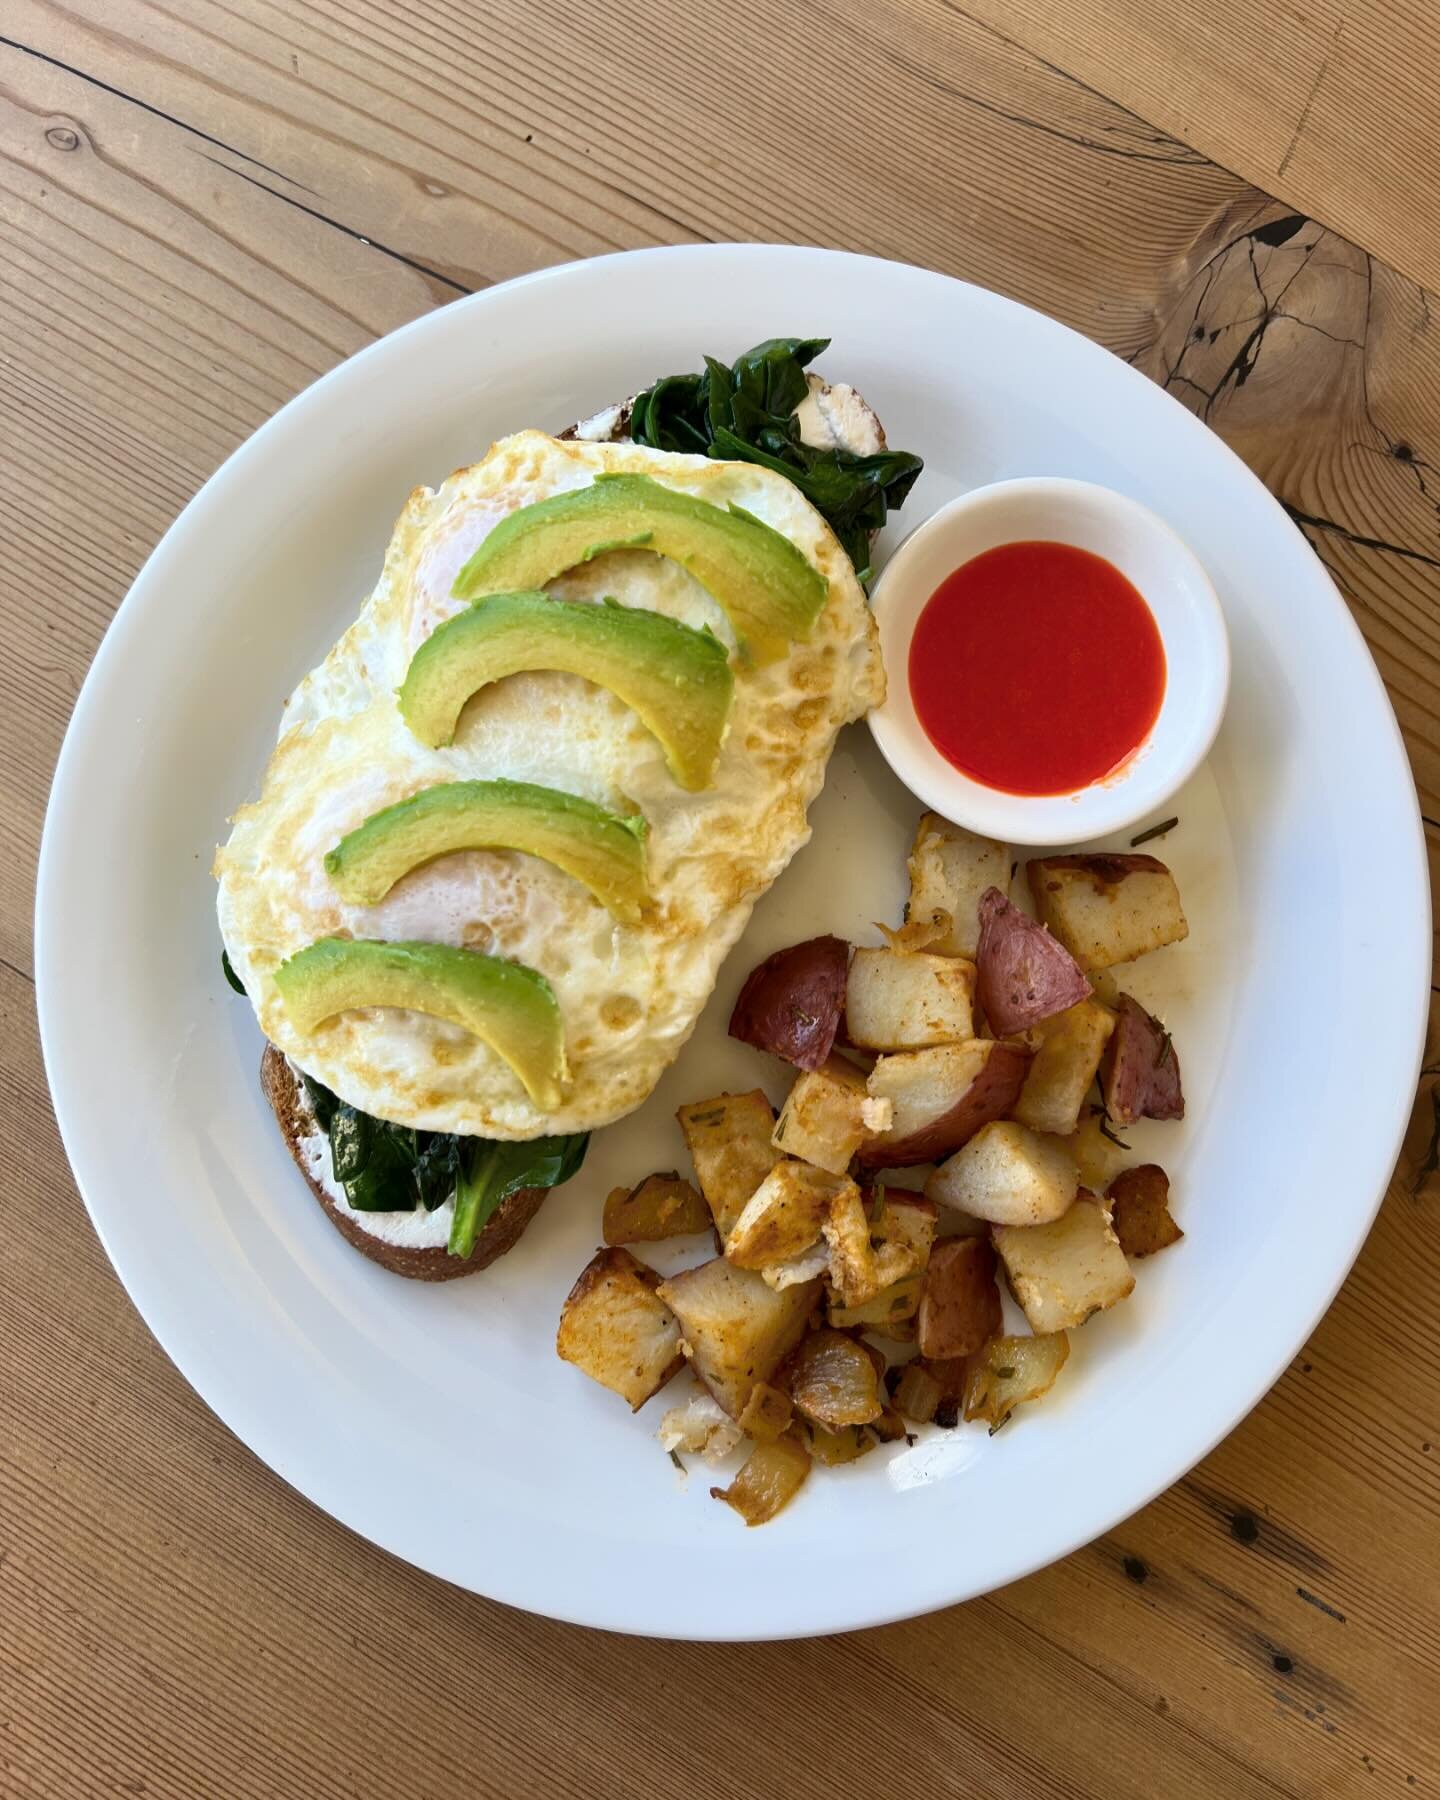 Introducing our Toast Florentine!  Made with goat cheese, saut&eacute;ed spinach, two fried eggs and topped with avocado slices.  It&rsquo;s served along side Julio&rsquo;s roasted potatoes and house made hot sauce.  Truly delicious!

#breakfast #toa